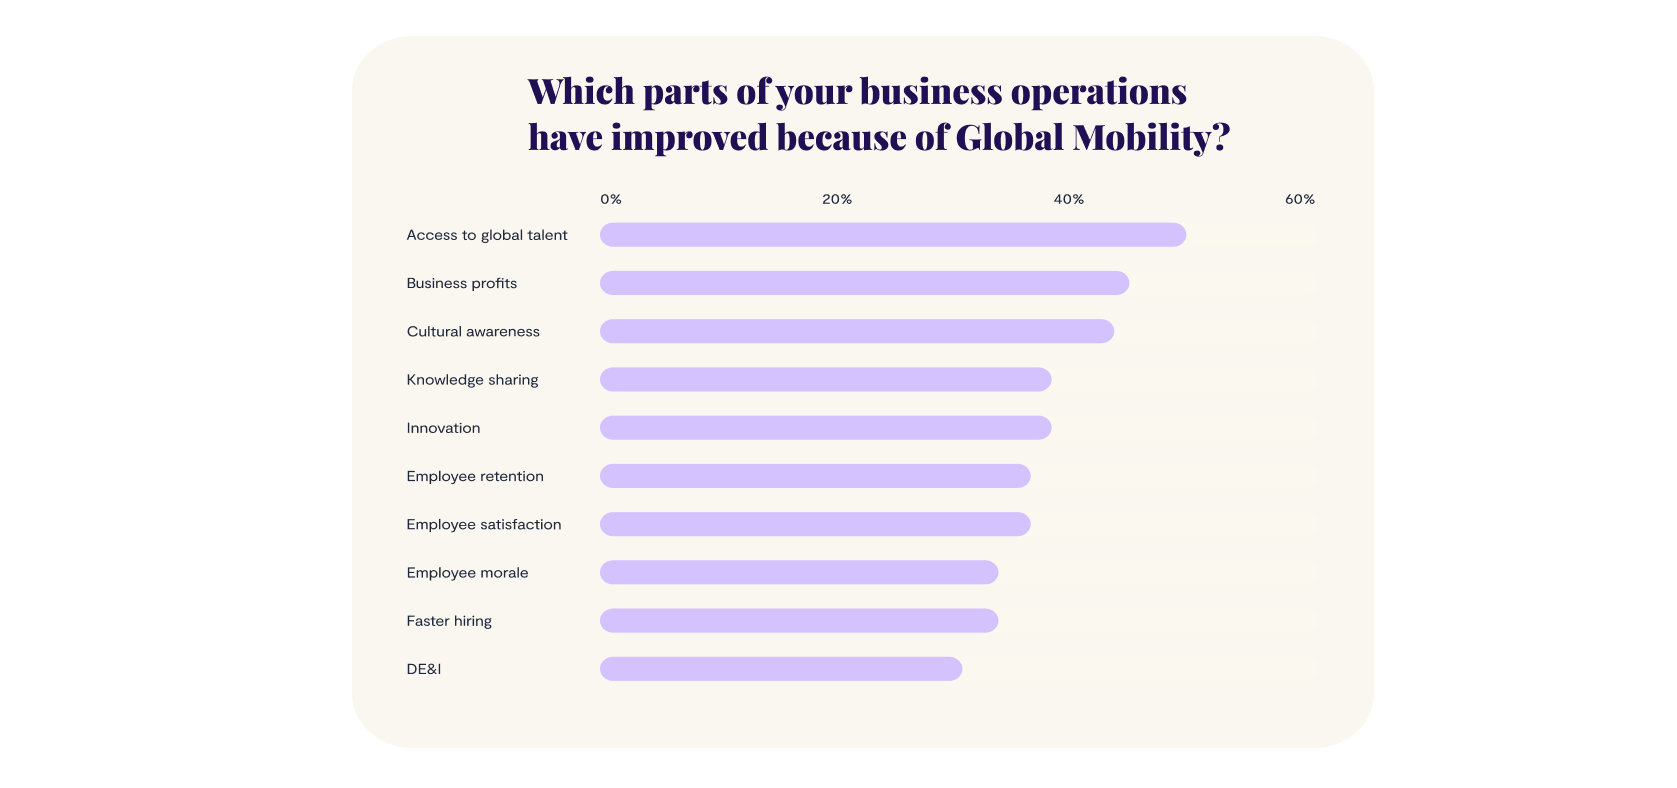 Which parts of your business operations have improved because of Global Mobility